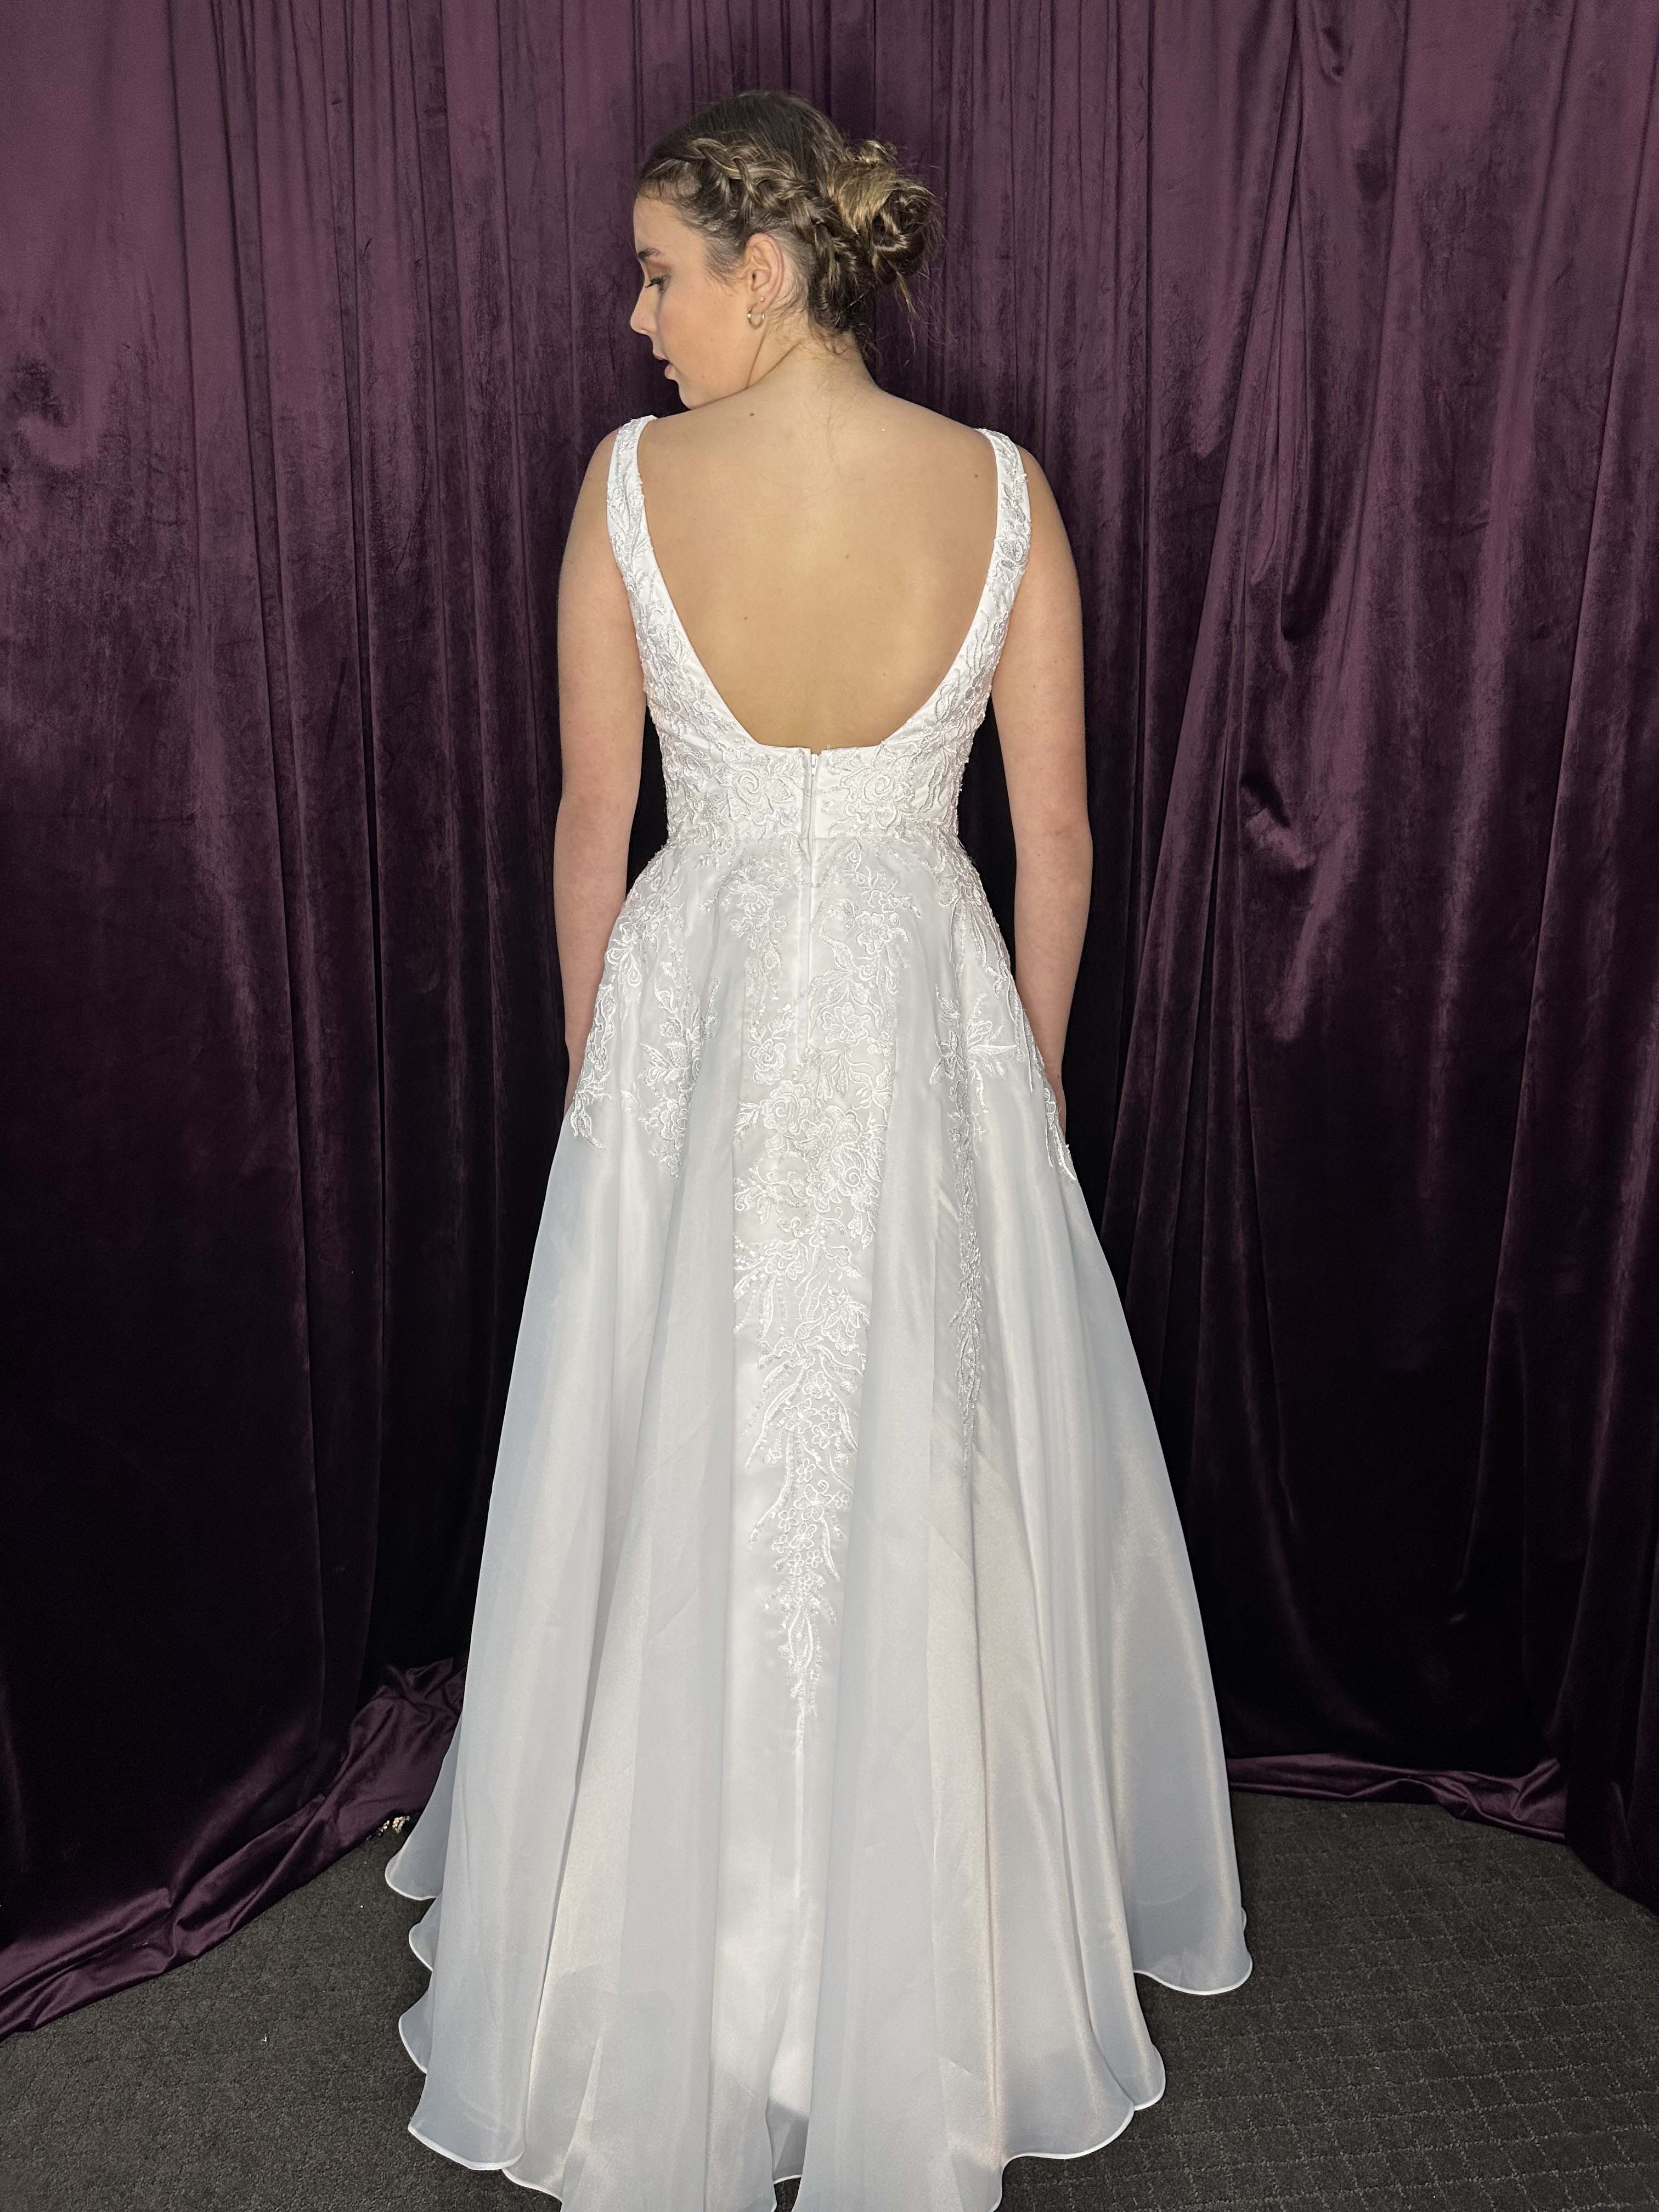 Show Sample: #1787 - Organza A-Line Wedding Dress with Square Neckline with Lace